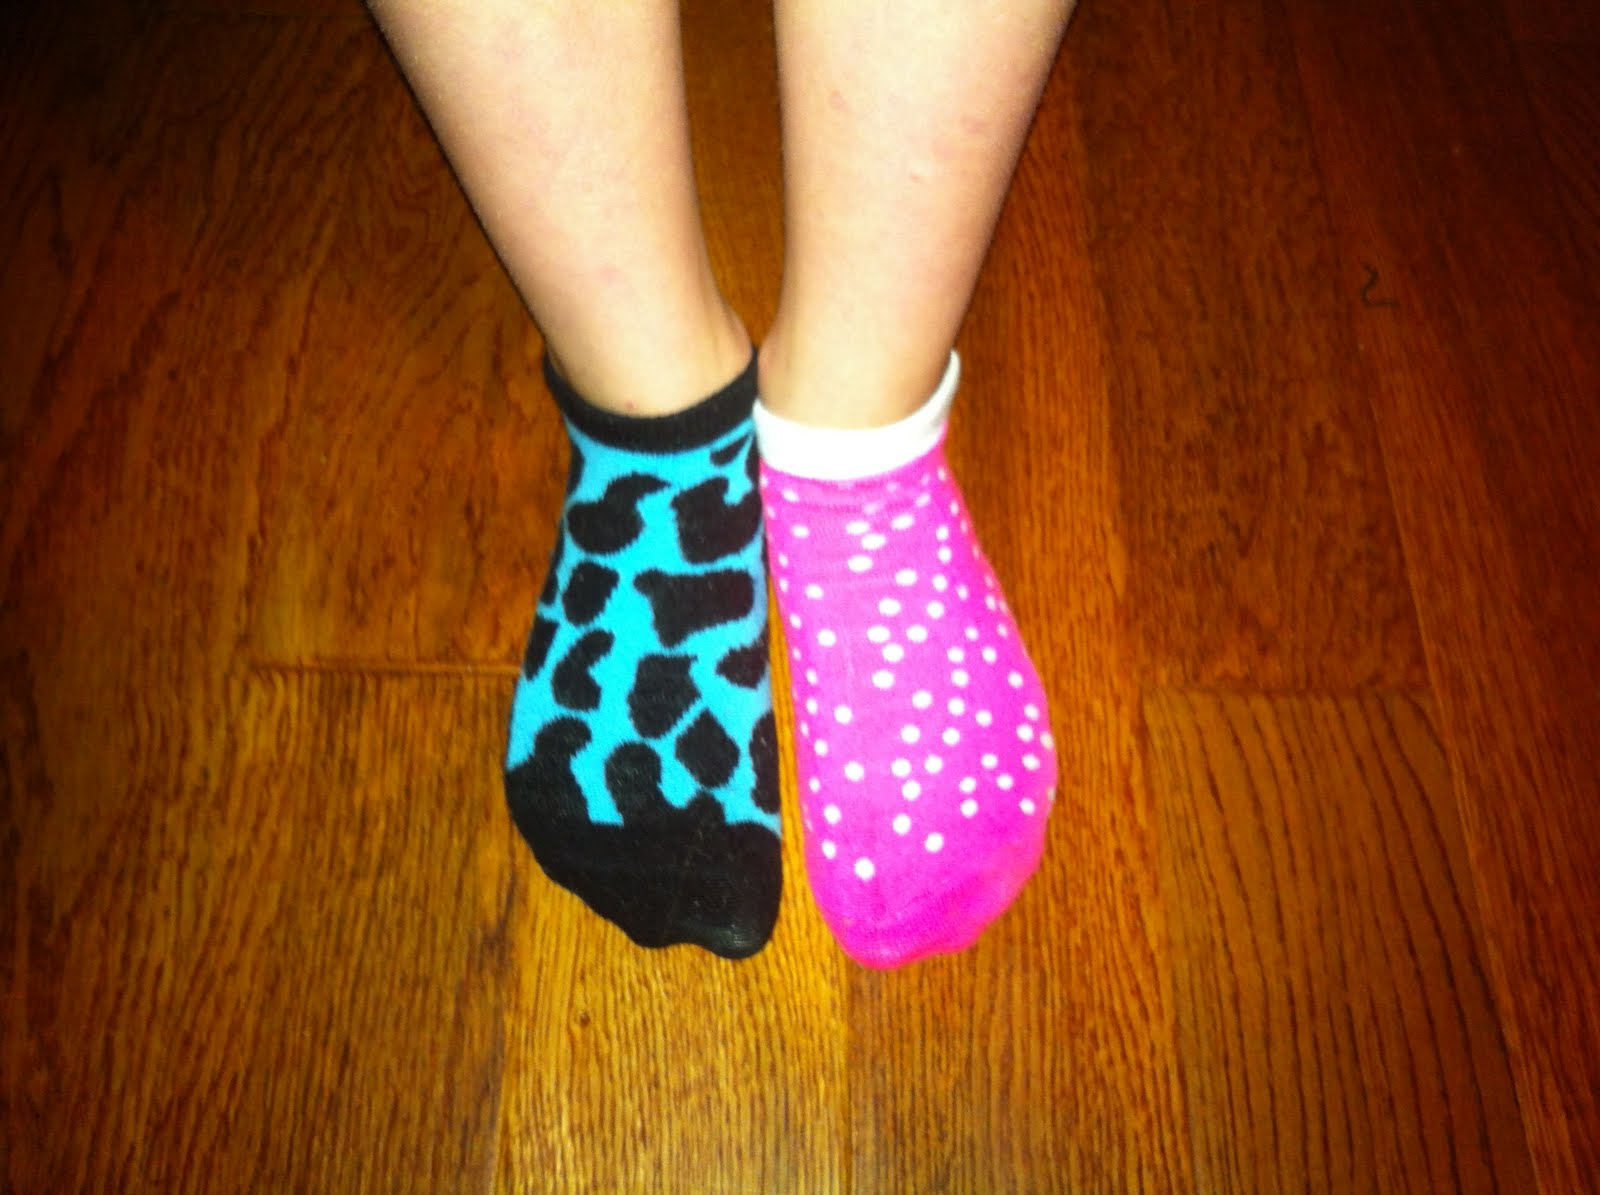 The Chilton's: Feathers and Mismatched Socks